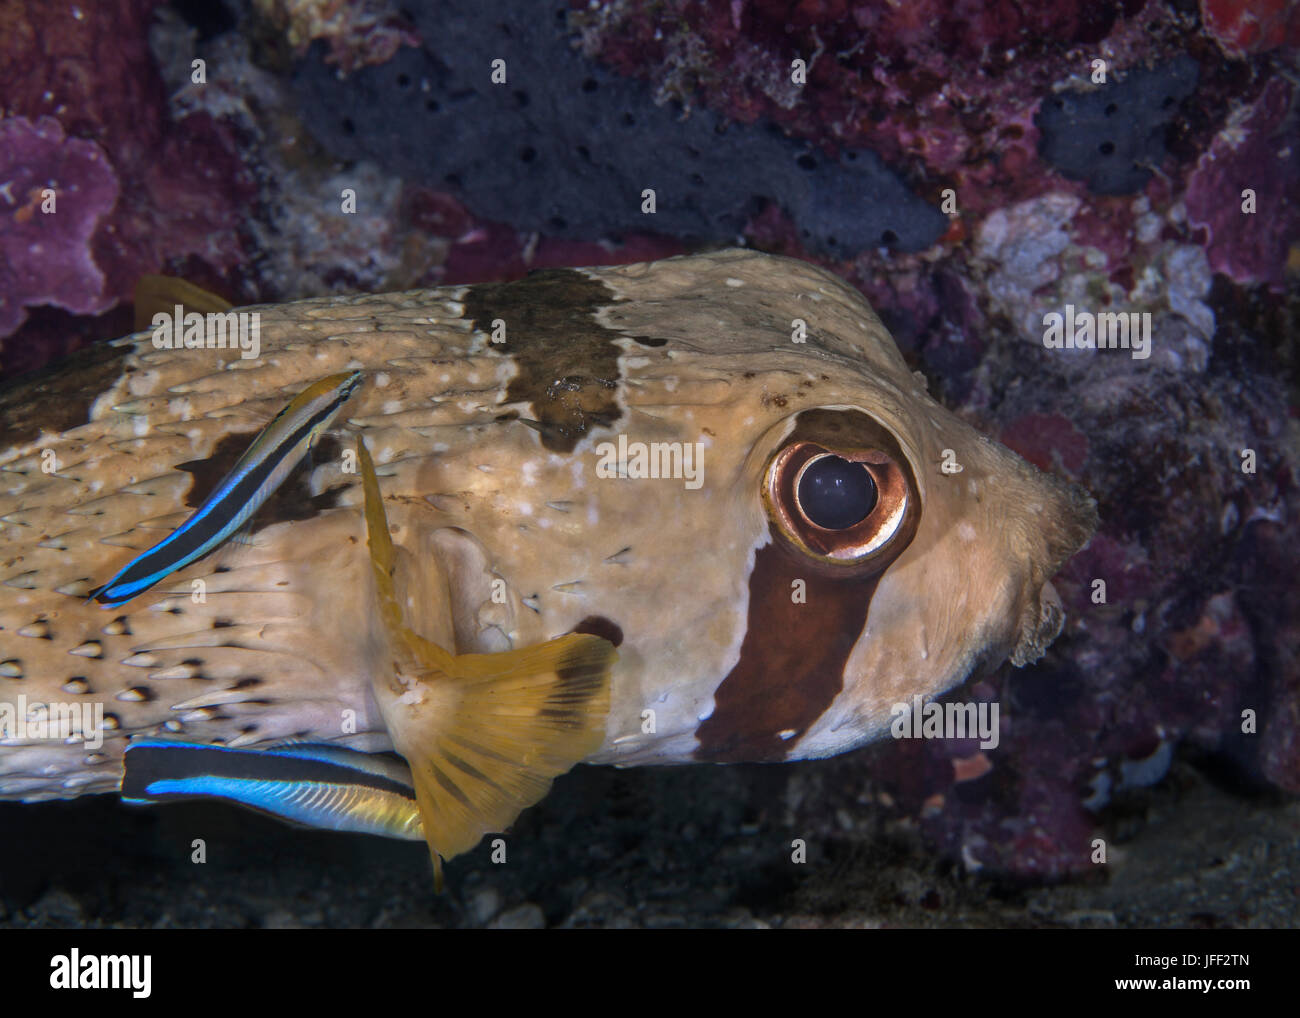 Porcupine pufferfish (Diodon holocanthus) at cleaning station is serviced by two bluestreak wrasse. Indian Ocean, Maldives. Stock Photo